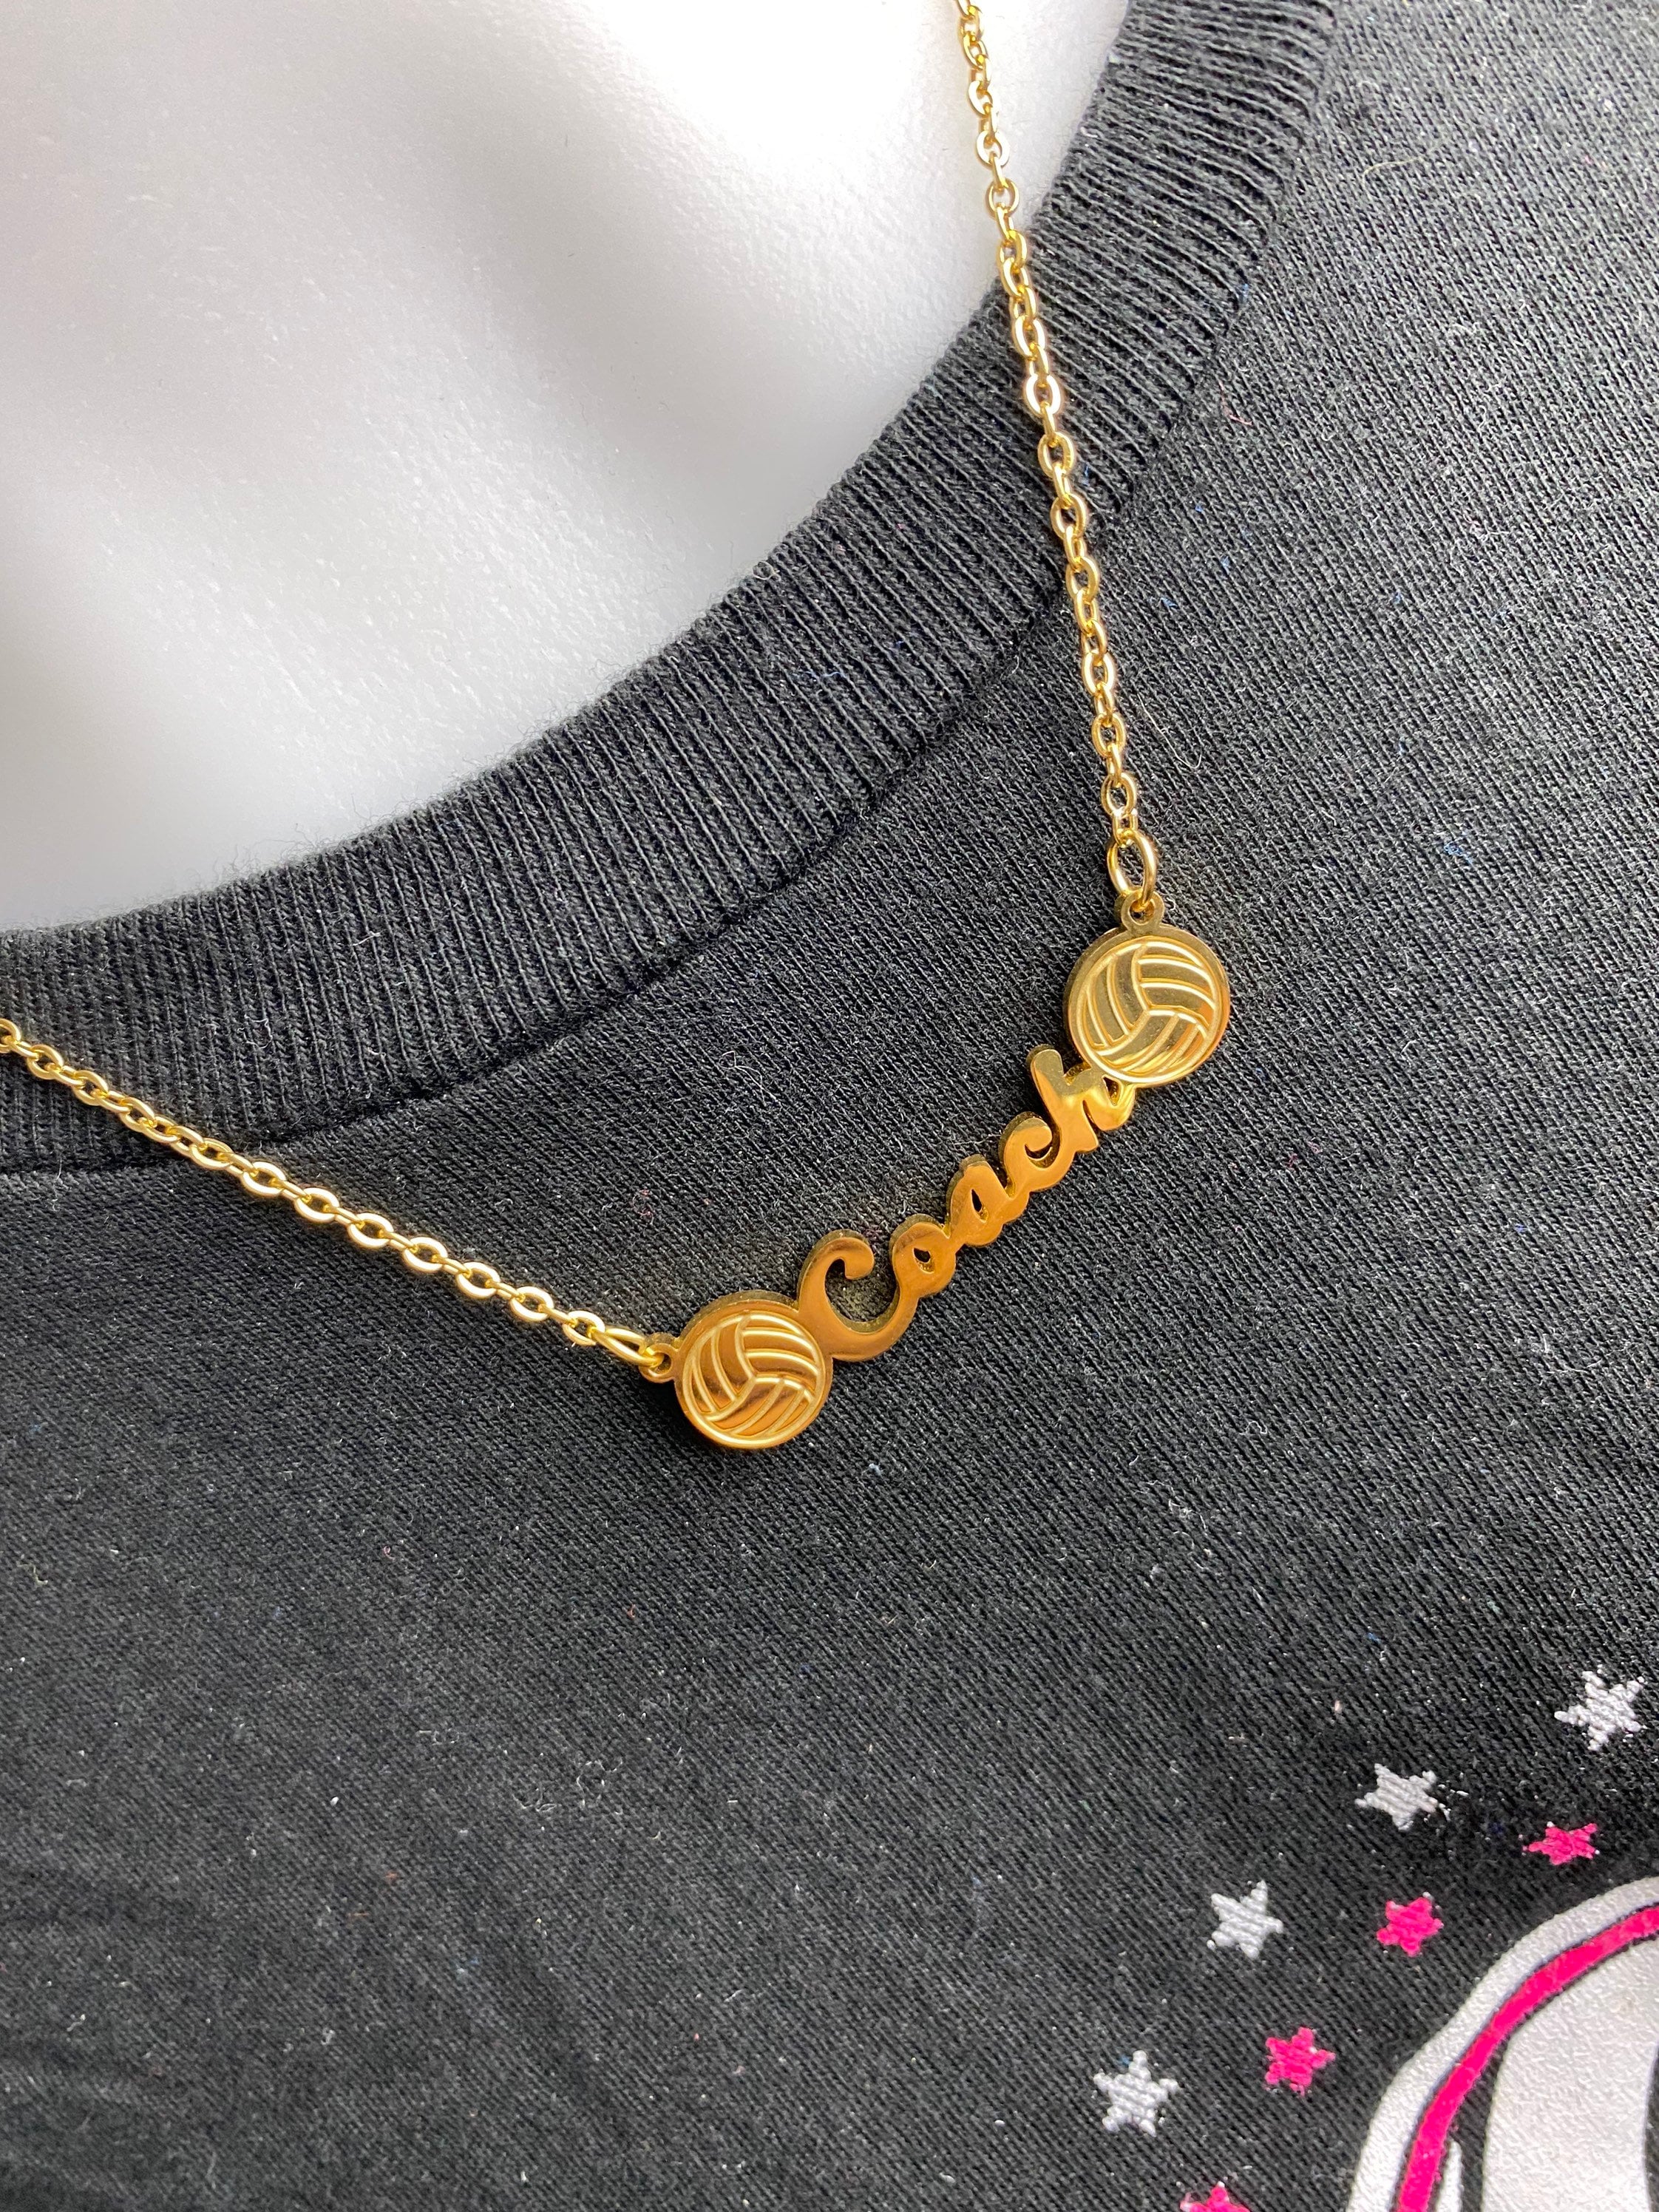 Volleyball “Coach” Necklace